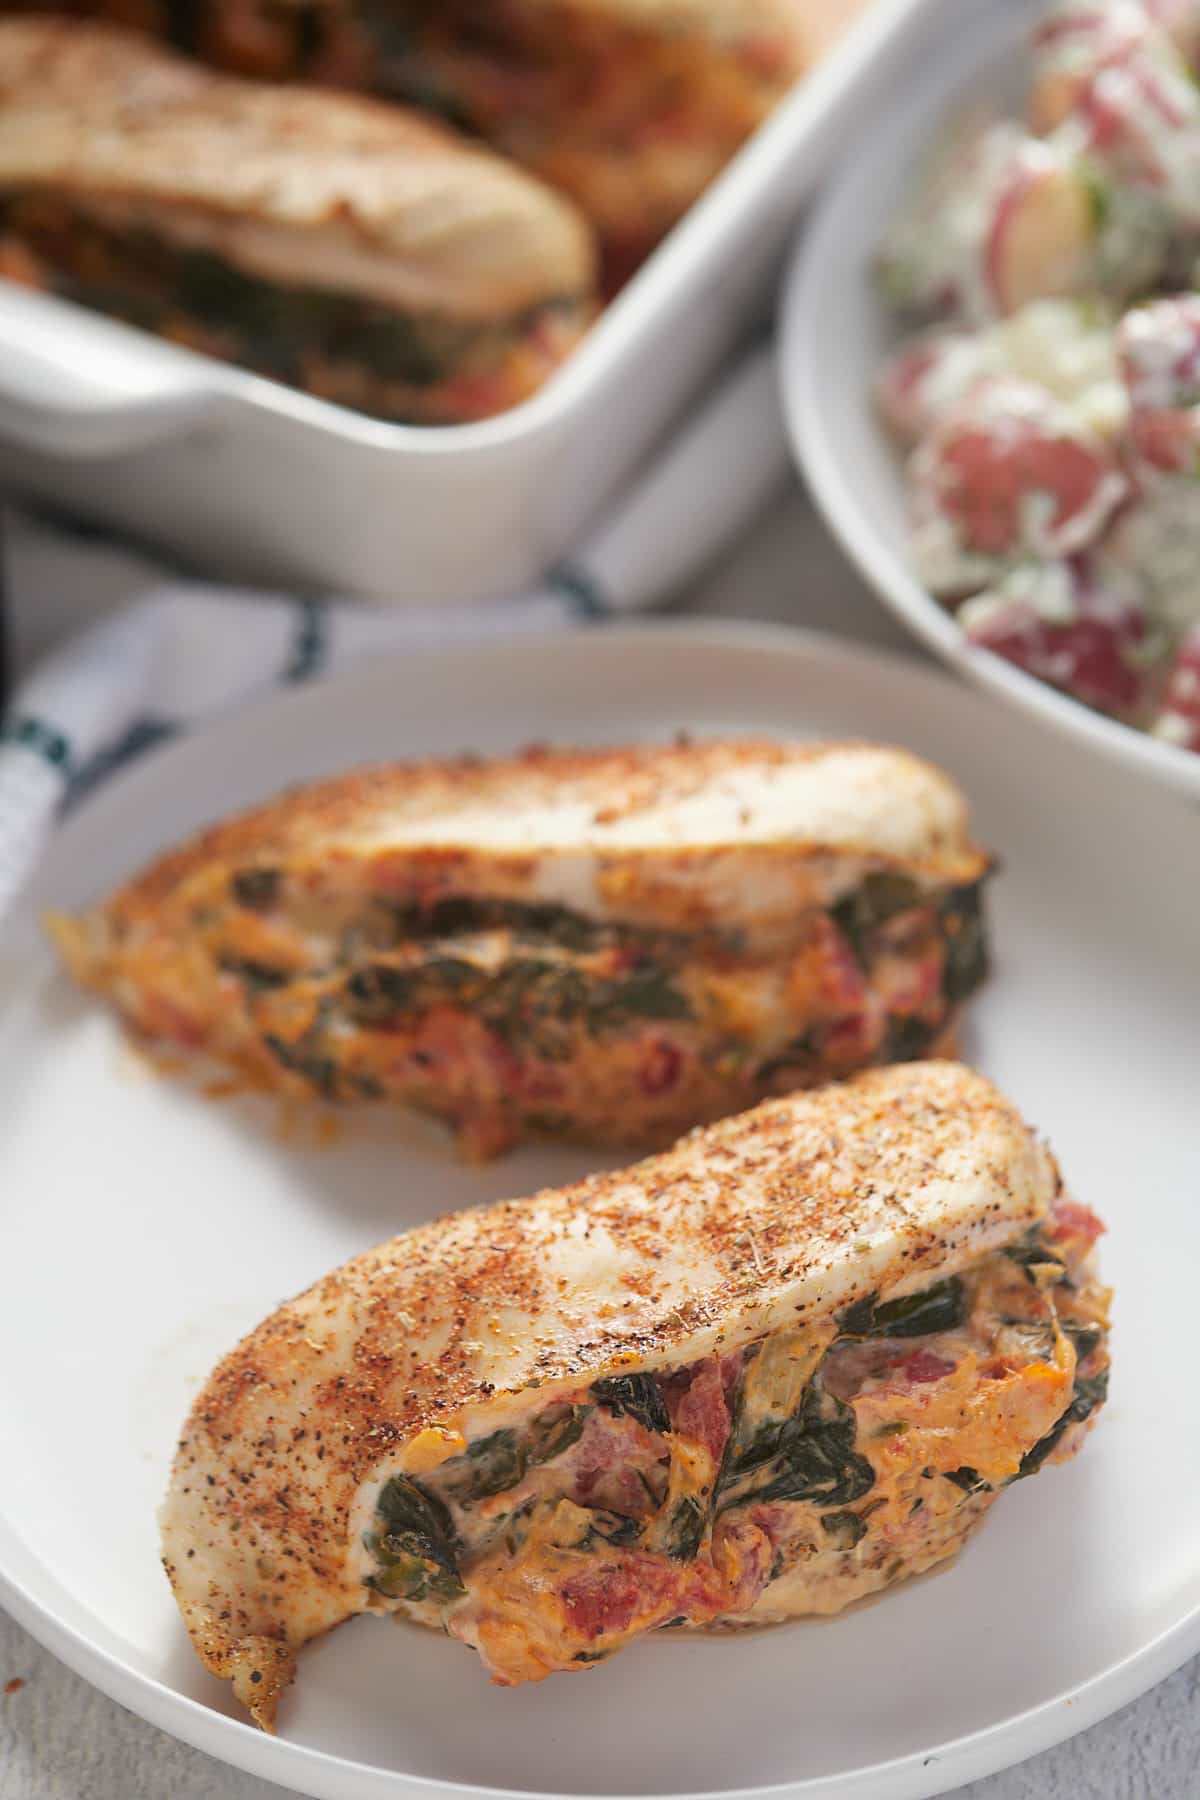 Two chicken breasts stuffed with spinach, tomatoes and cream cheese.